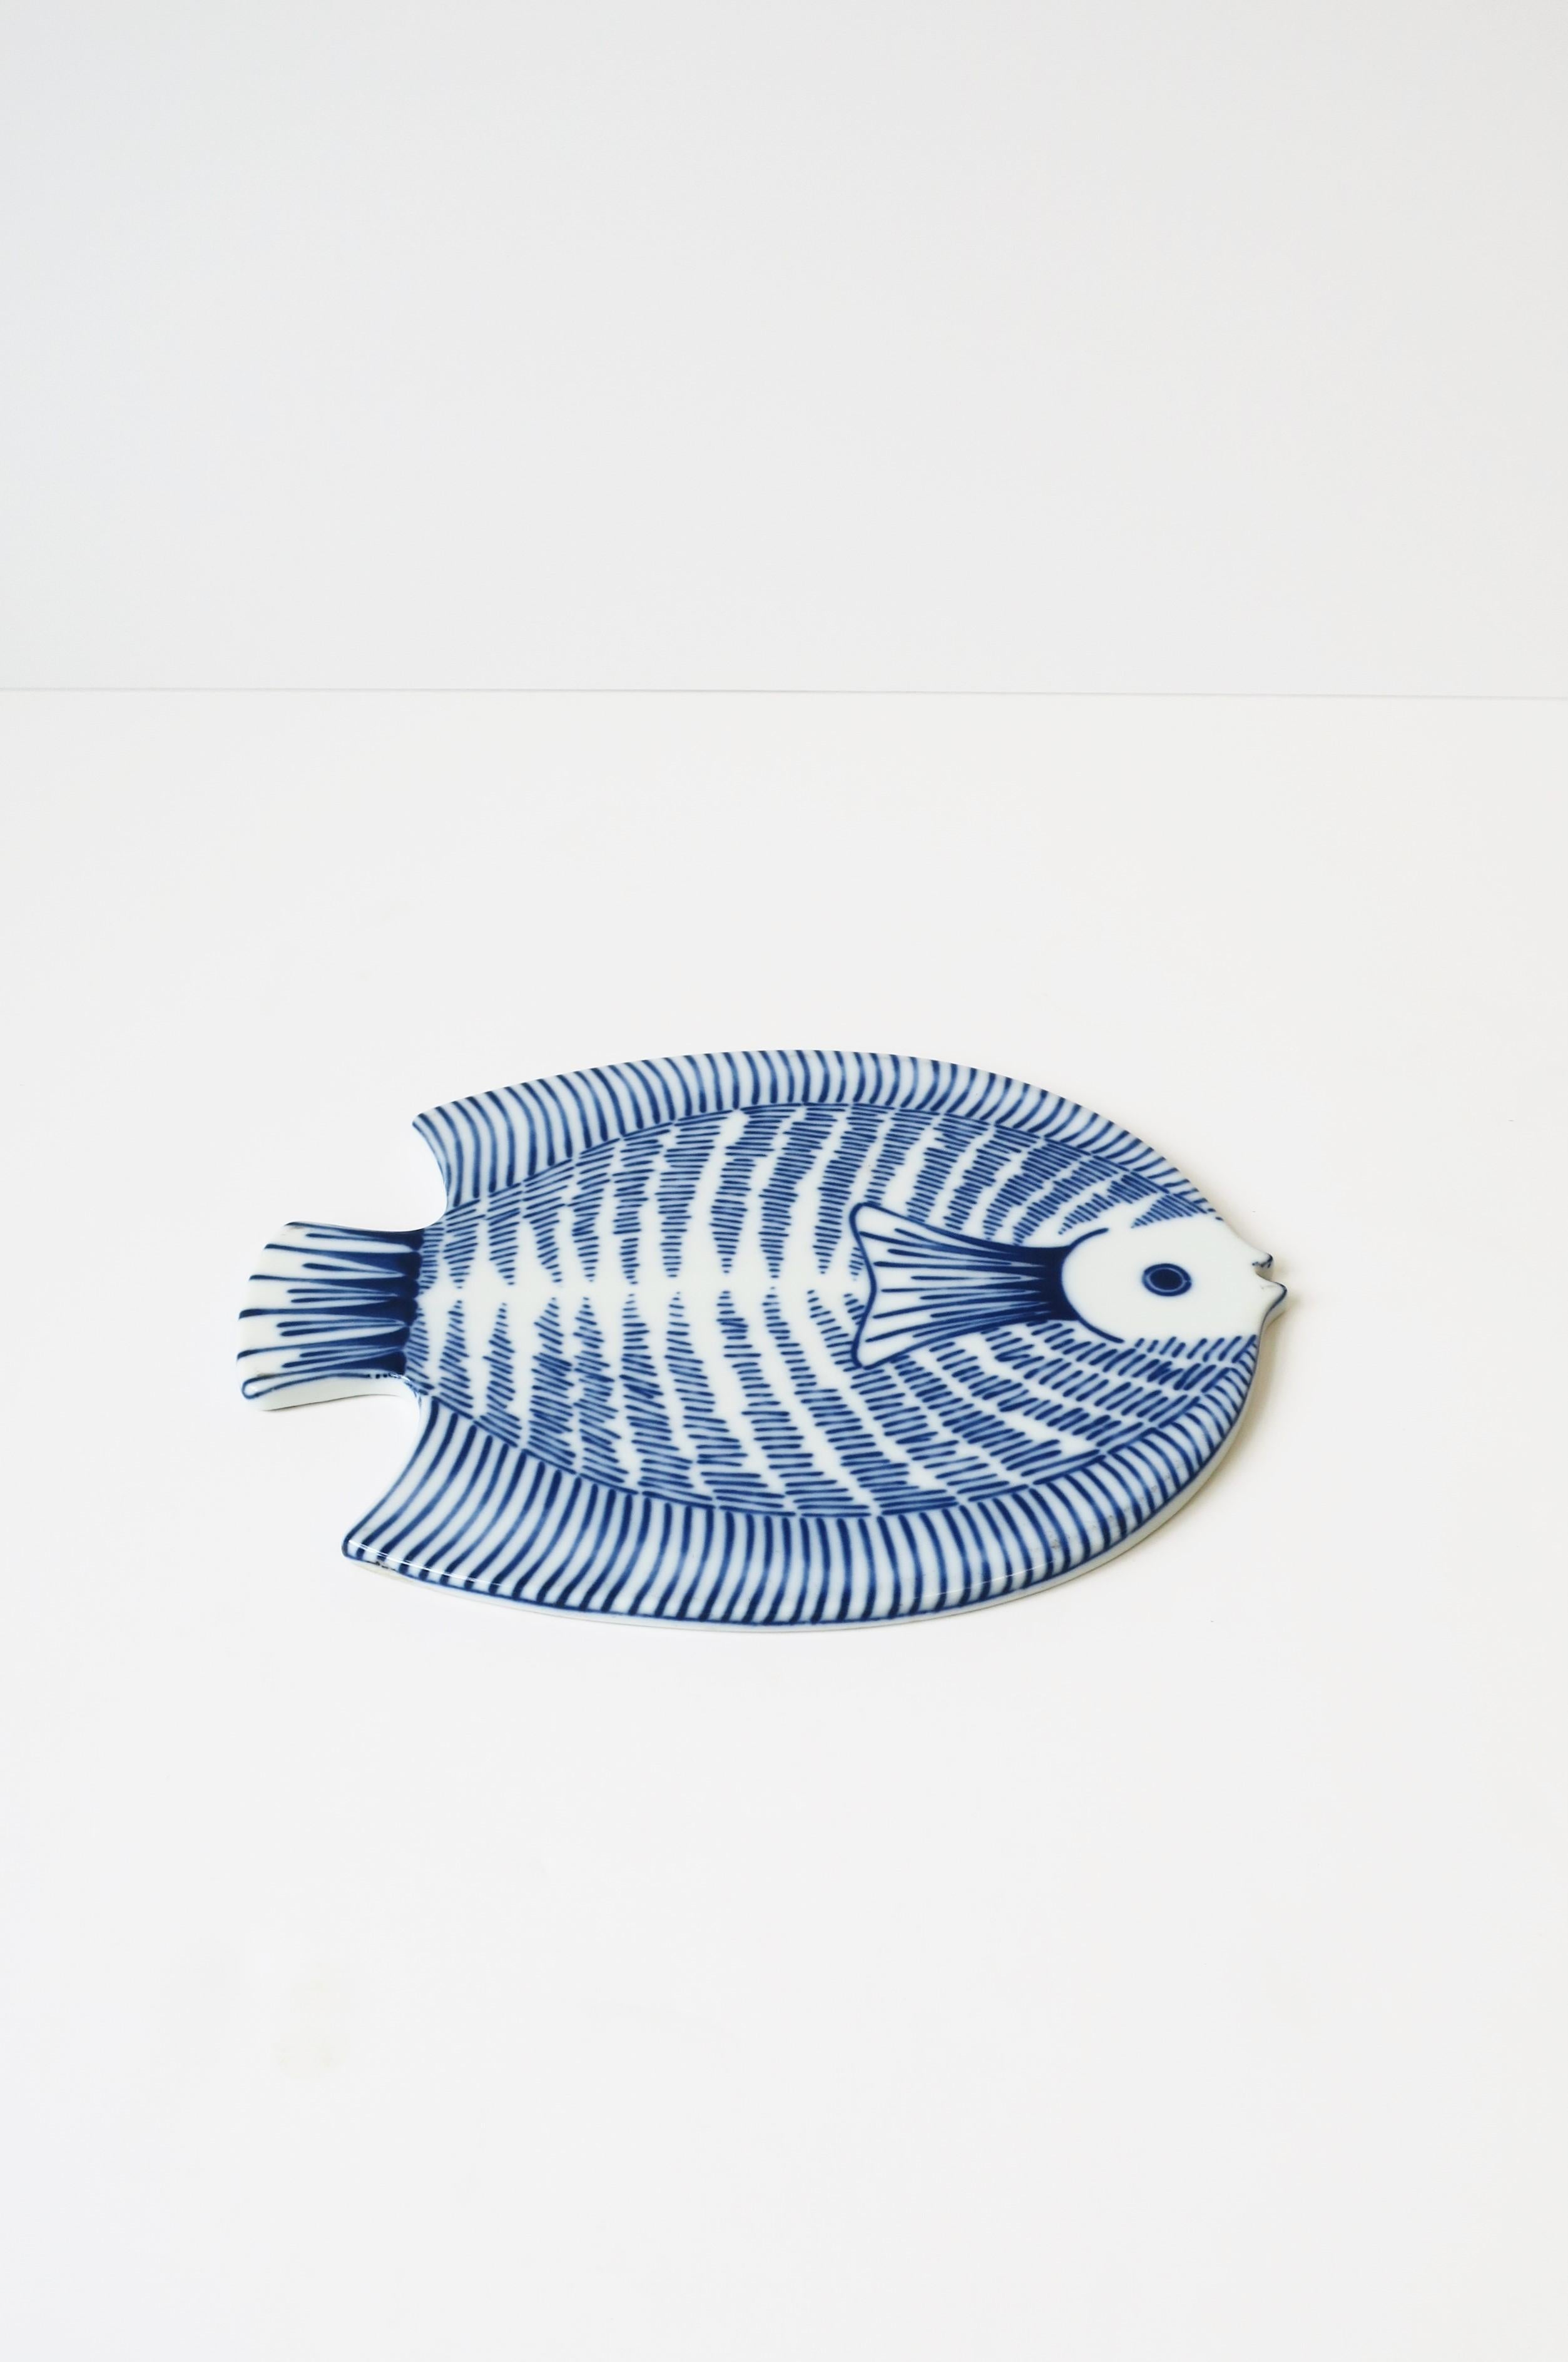 Vintage Blue and White Ceramic Fish Trivet or Wall Art 4